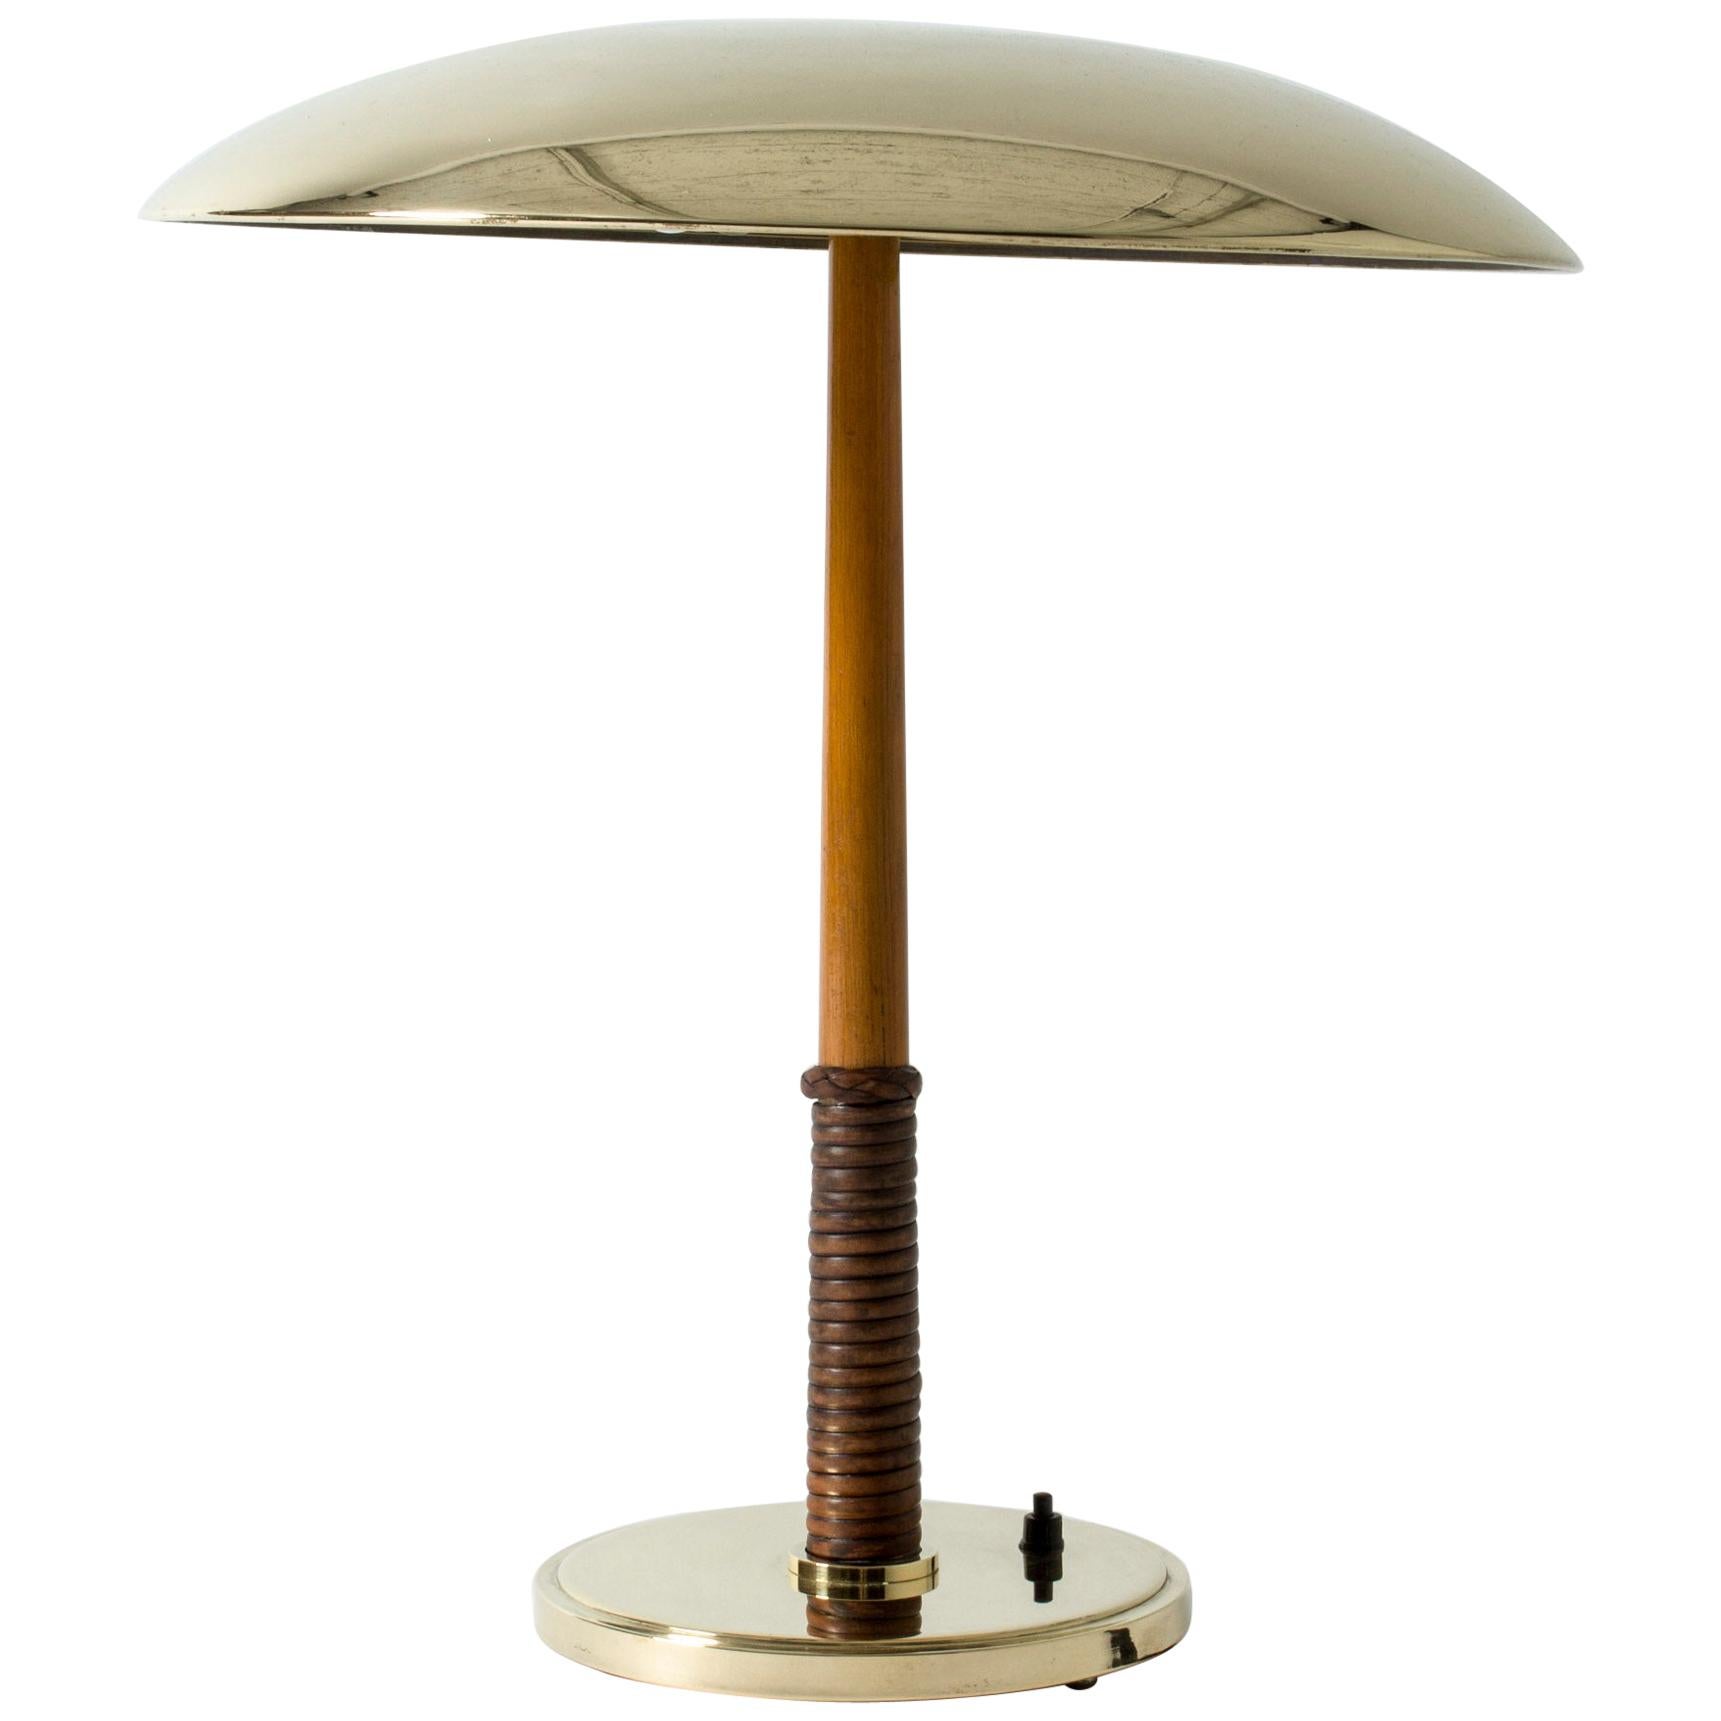 Brass, Mahogany and Leather Table Lamp from Böhlmarks, Sweden, 1940s